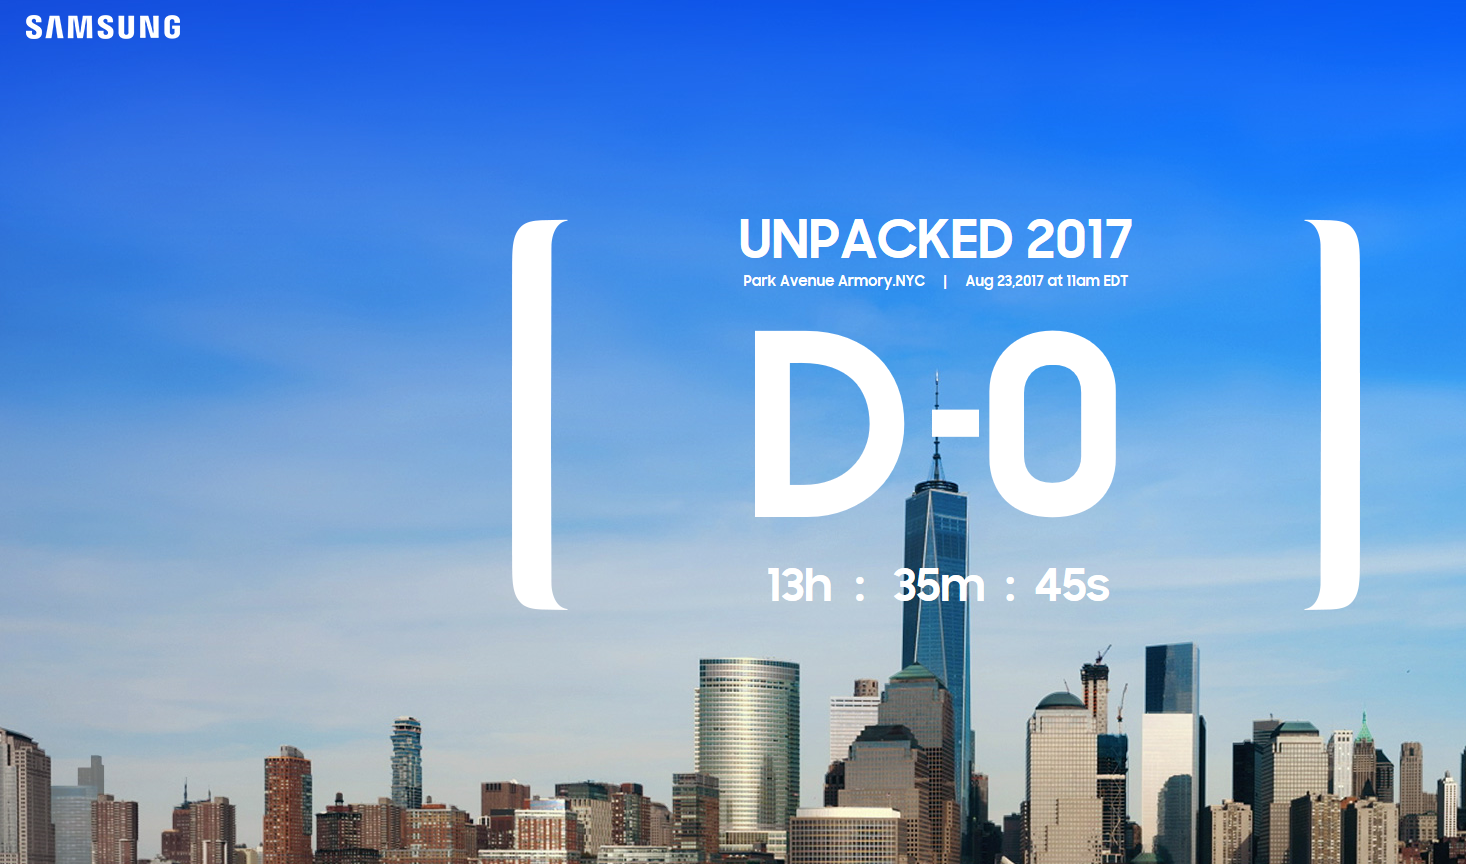 Samsung-Unpacked-2017-Event-23-August-2017.png